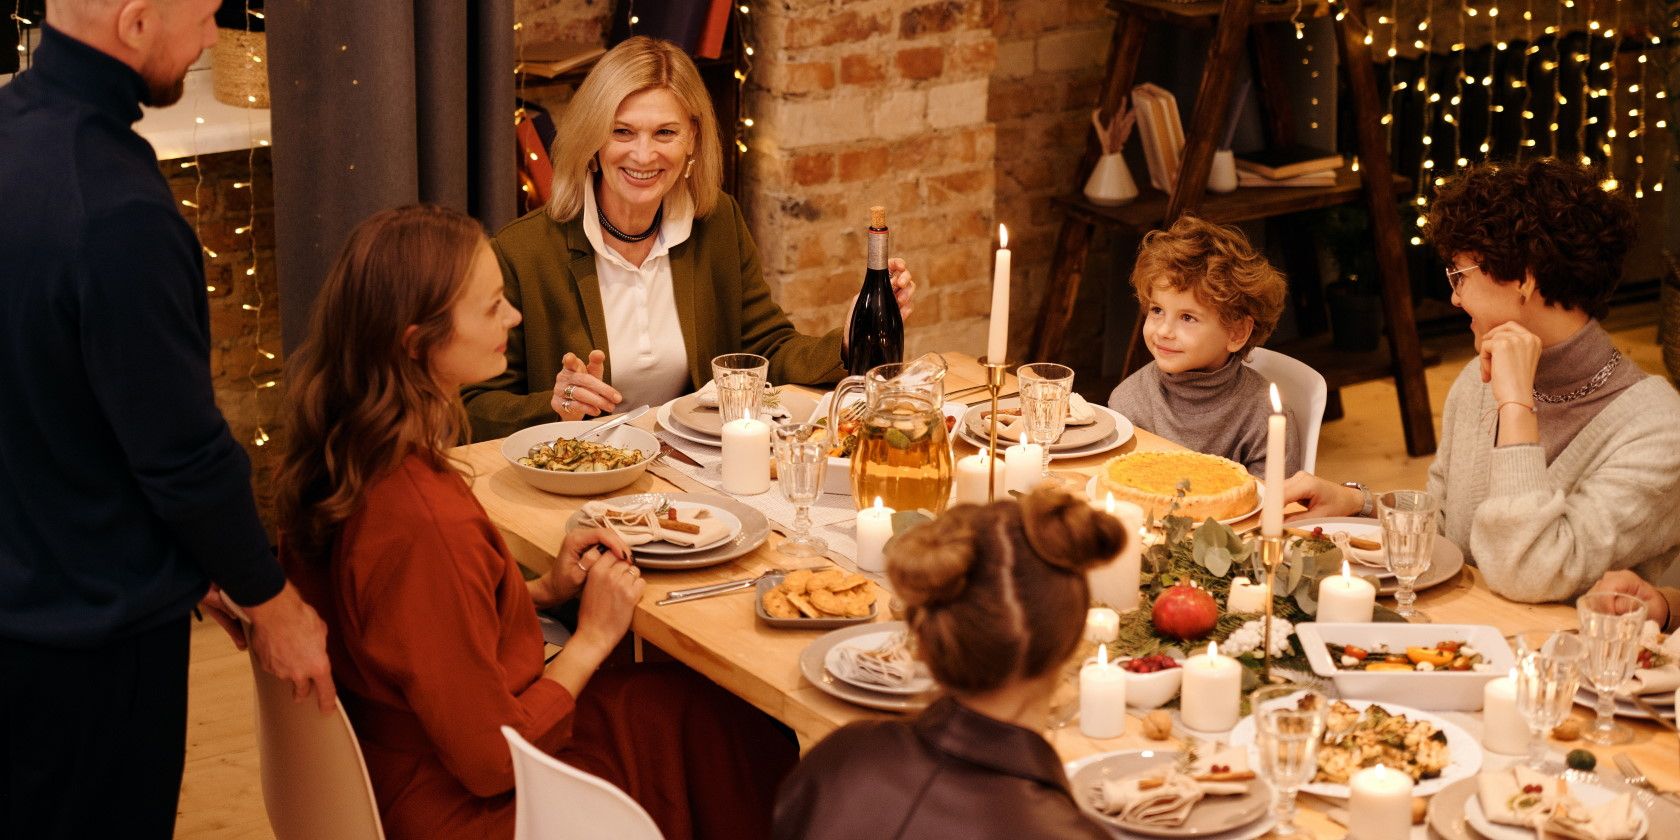 Family eating dinner at table and celebrating holiday season